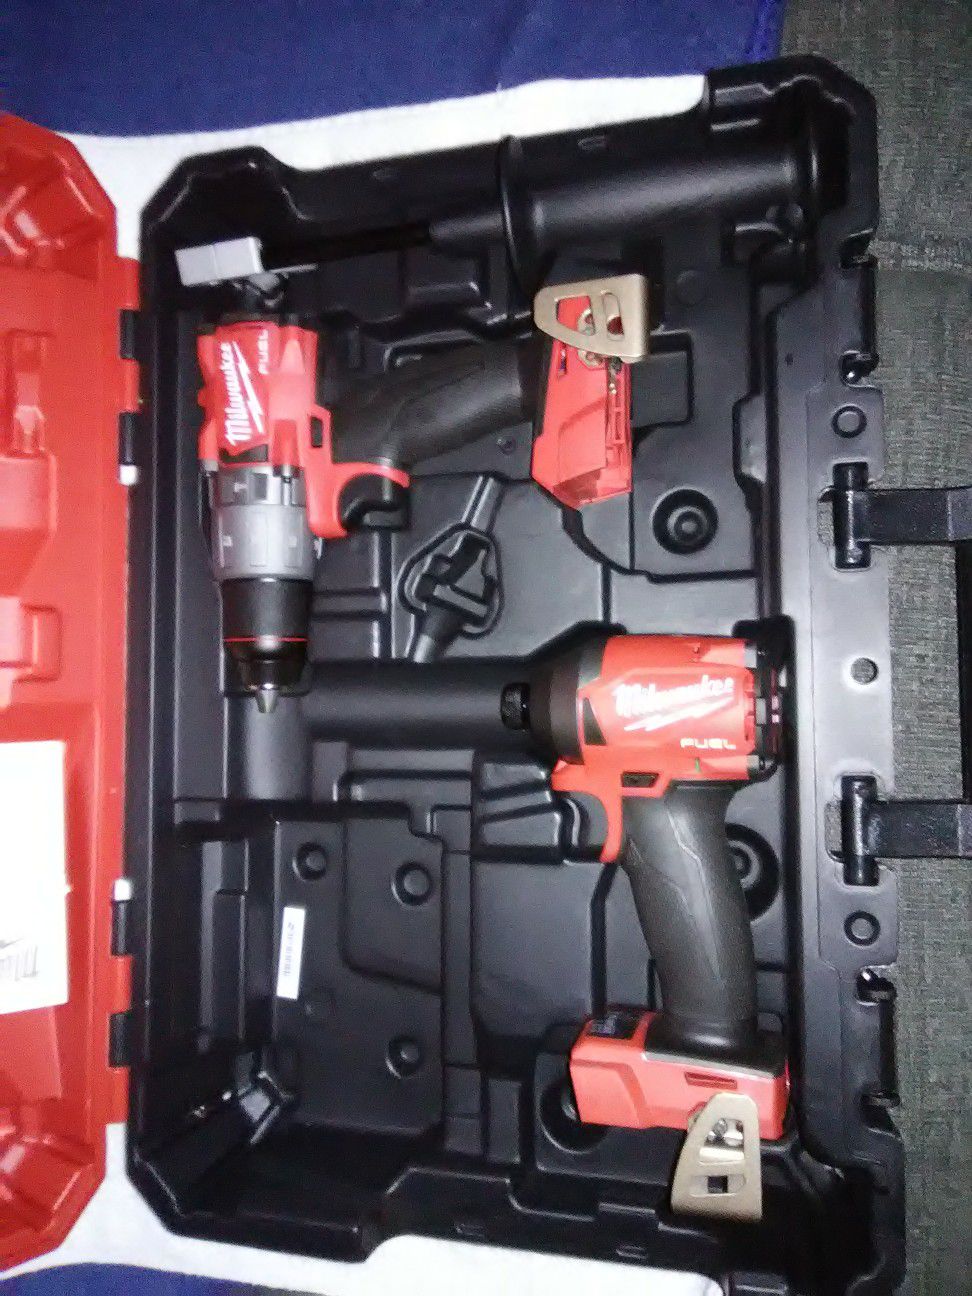 New Milwaukee M18 Fuel 1/2" Hammer Drill and 1/4" Hex Impact.